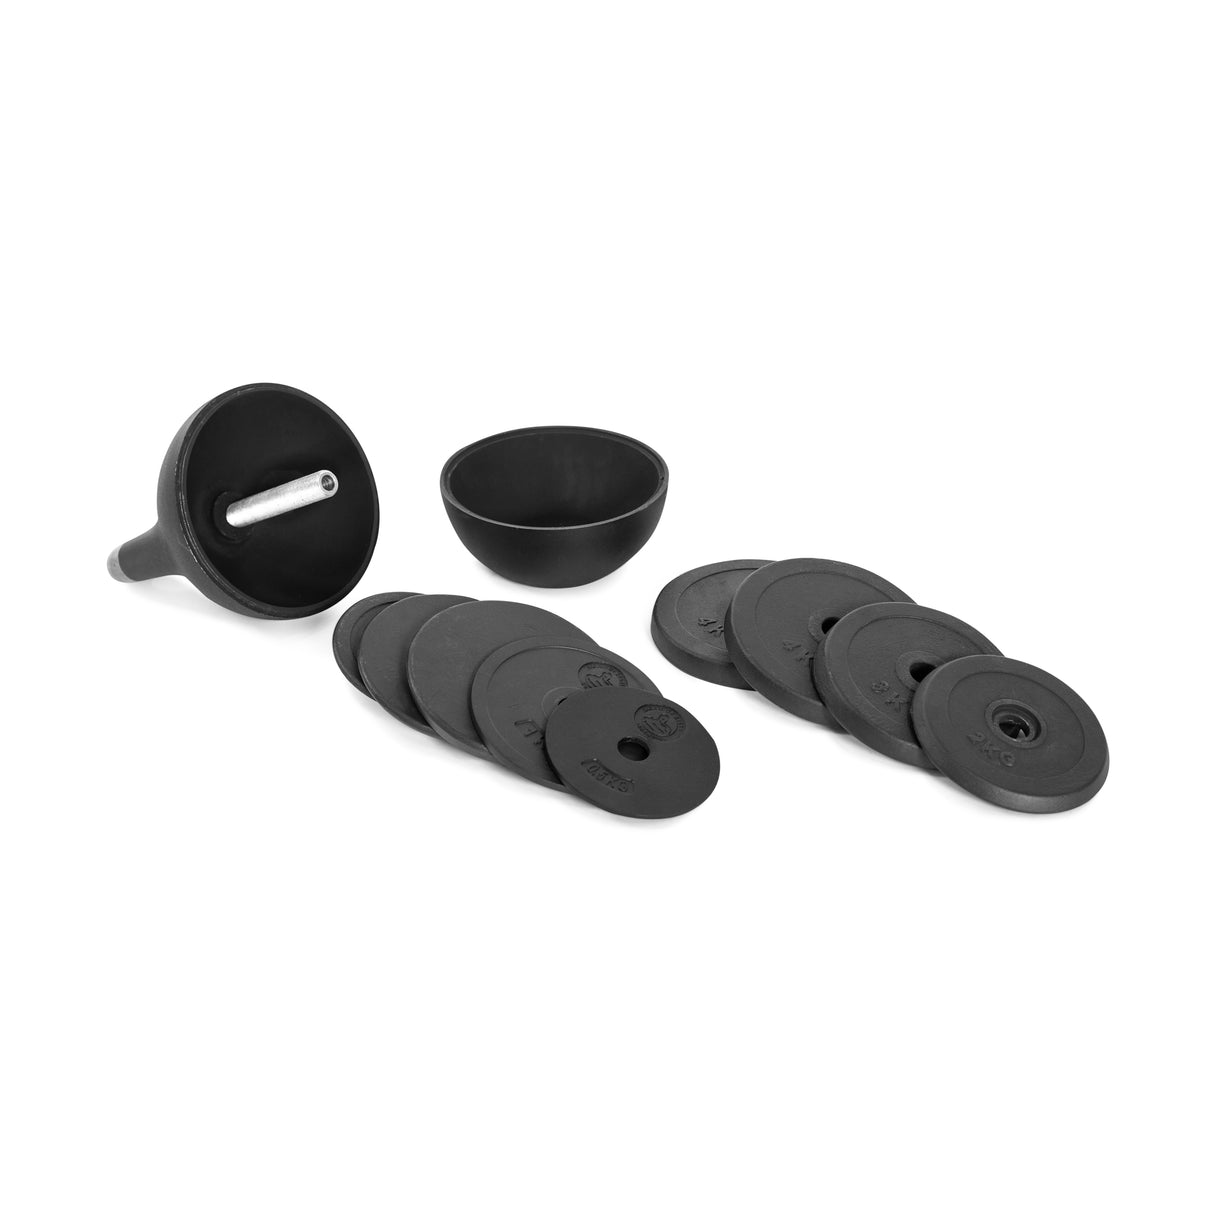 Disassemble Adjustable Competition Kettlebell